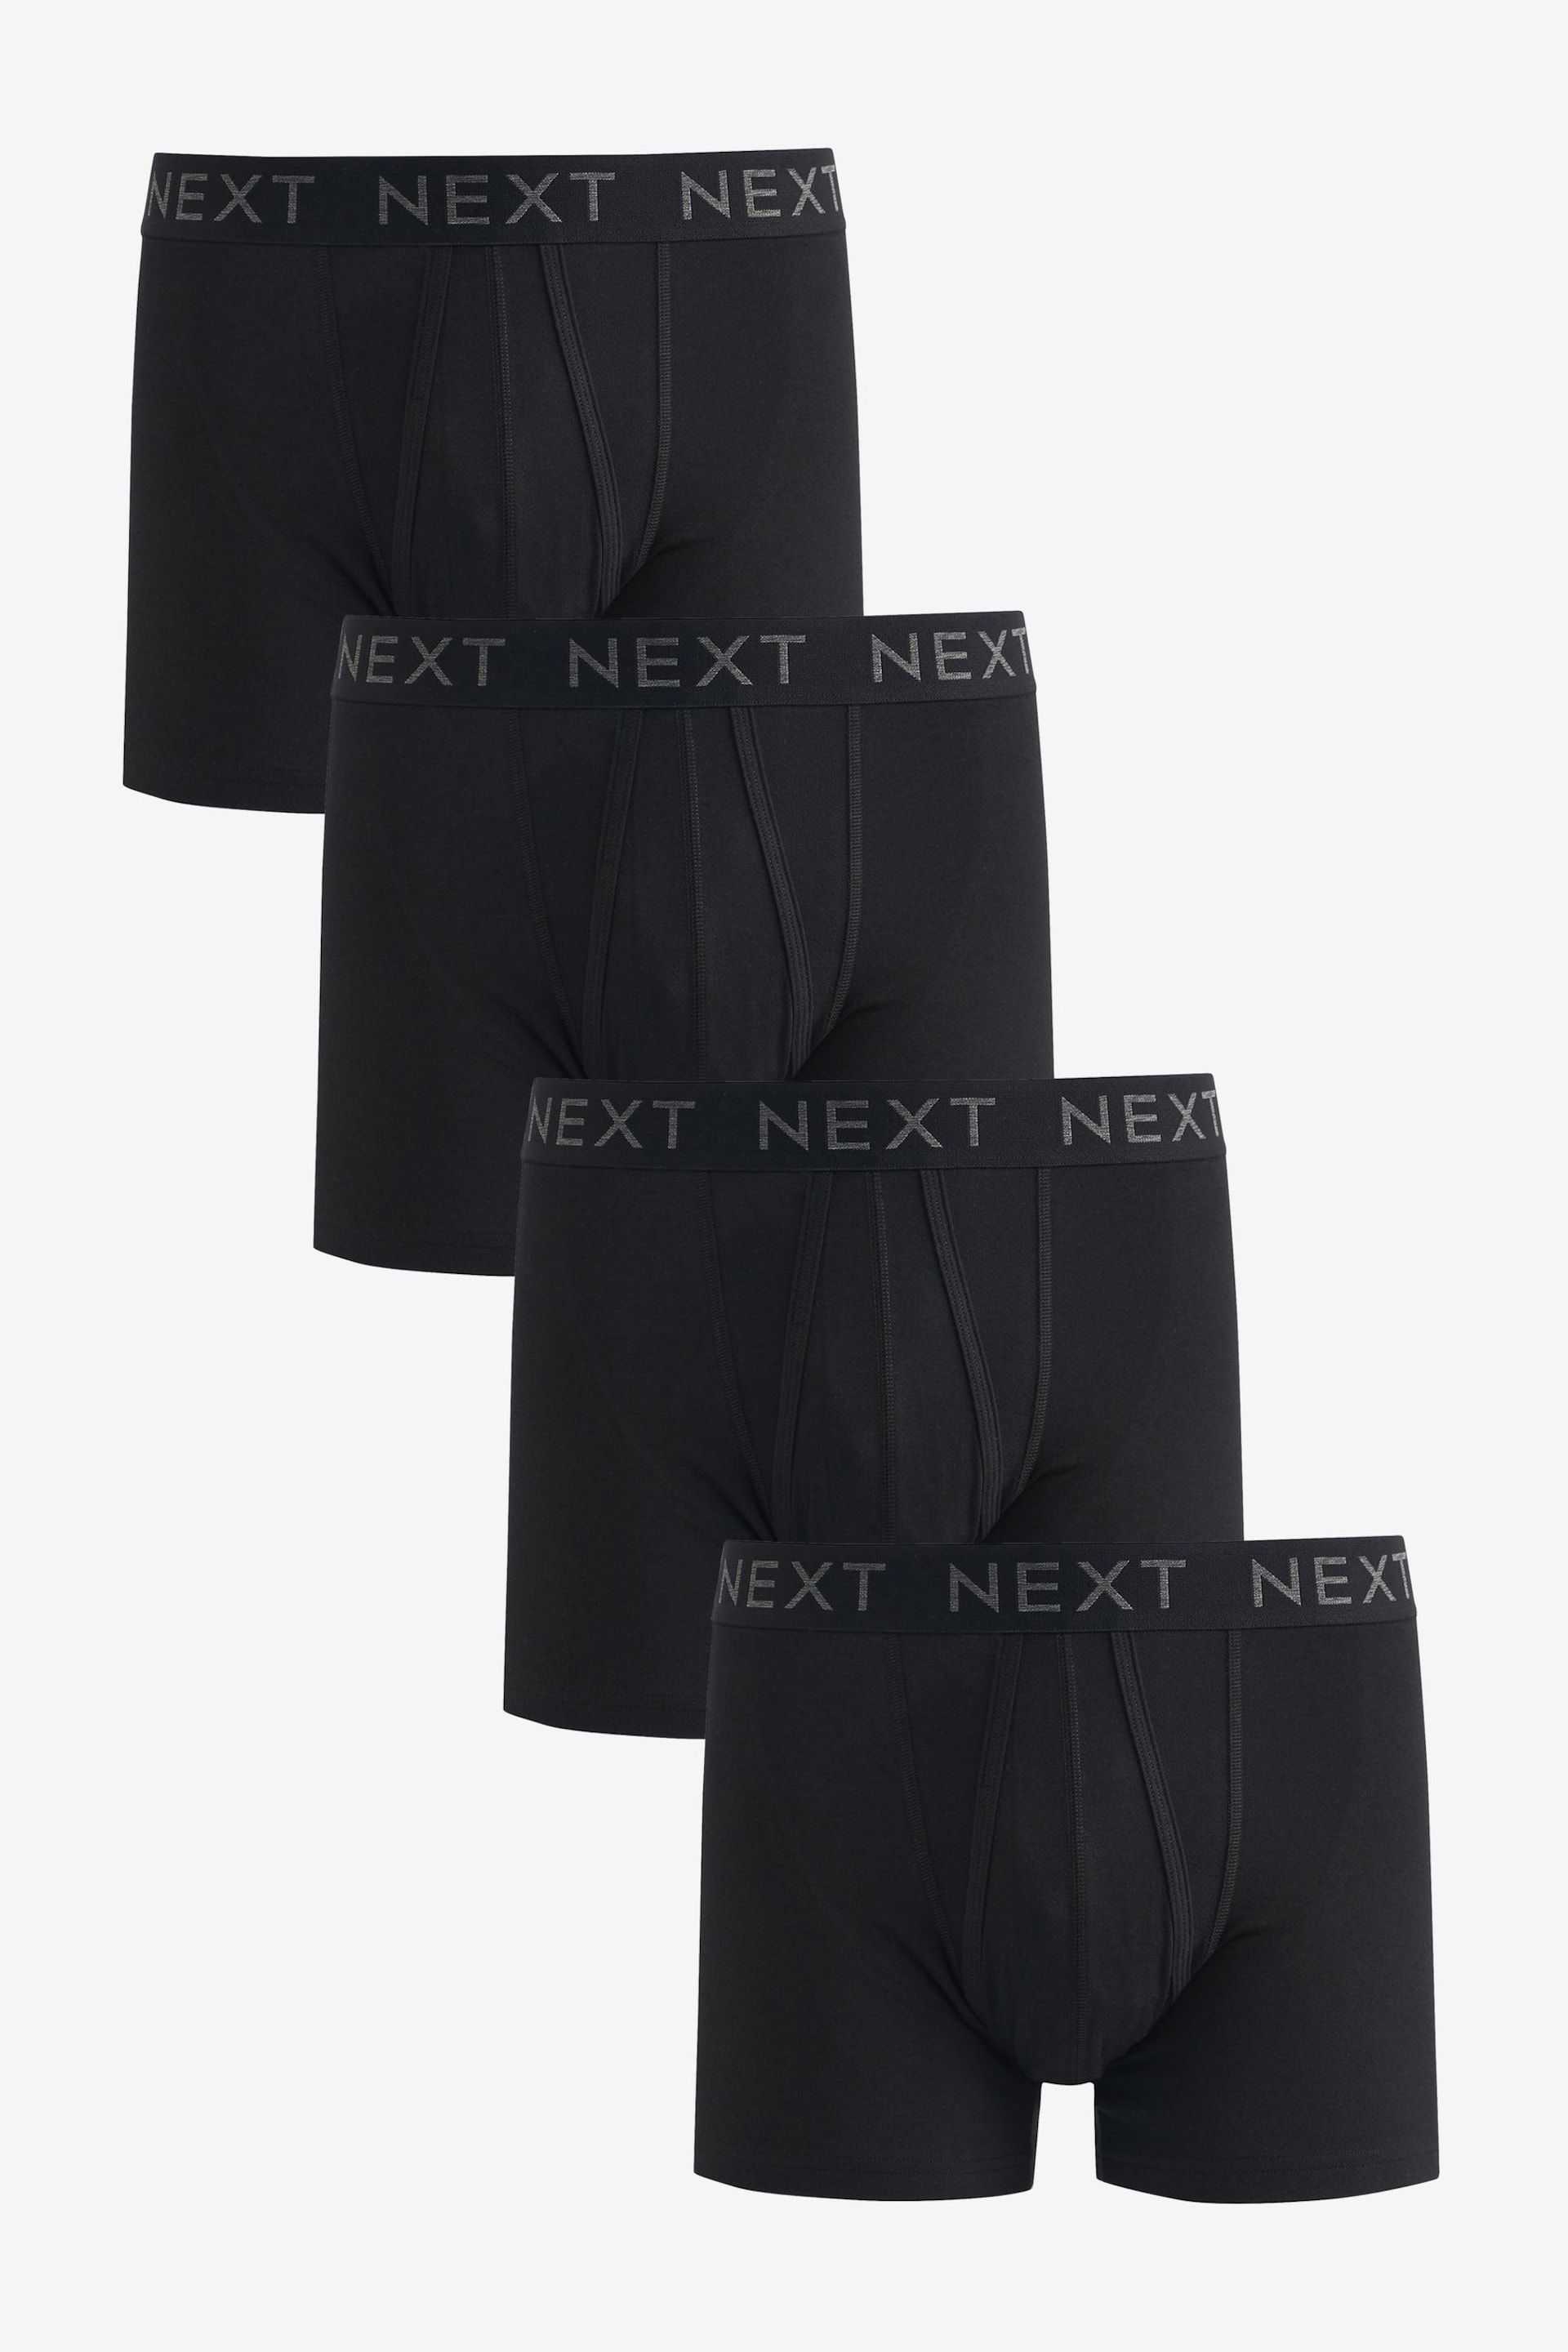 Black 4 pack A-Front Boxers - Image 1 of 6